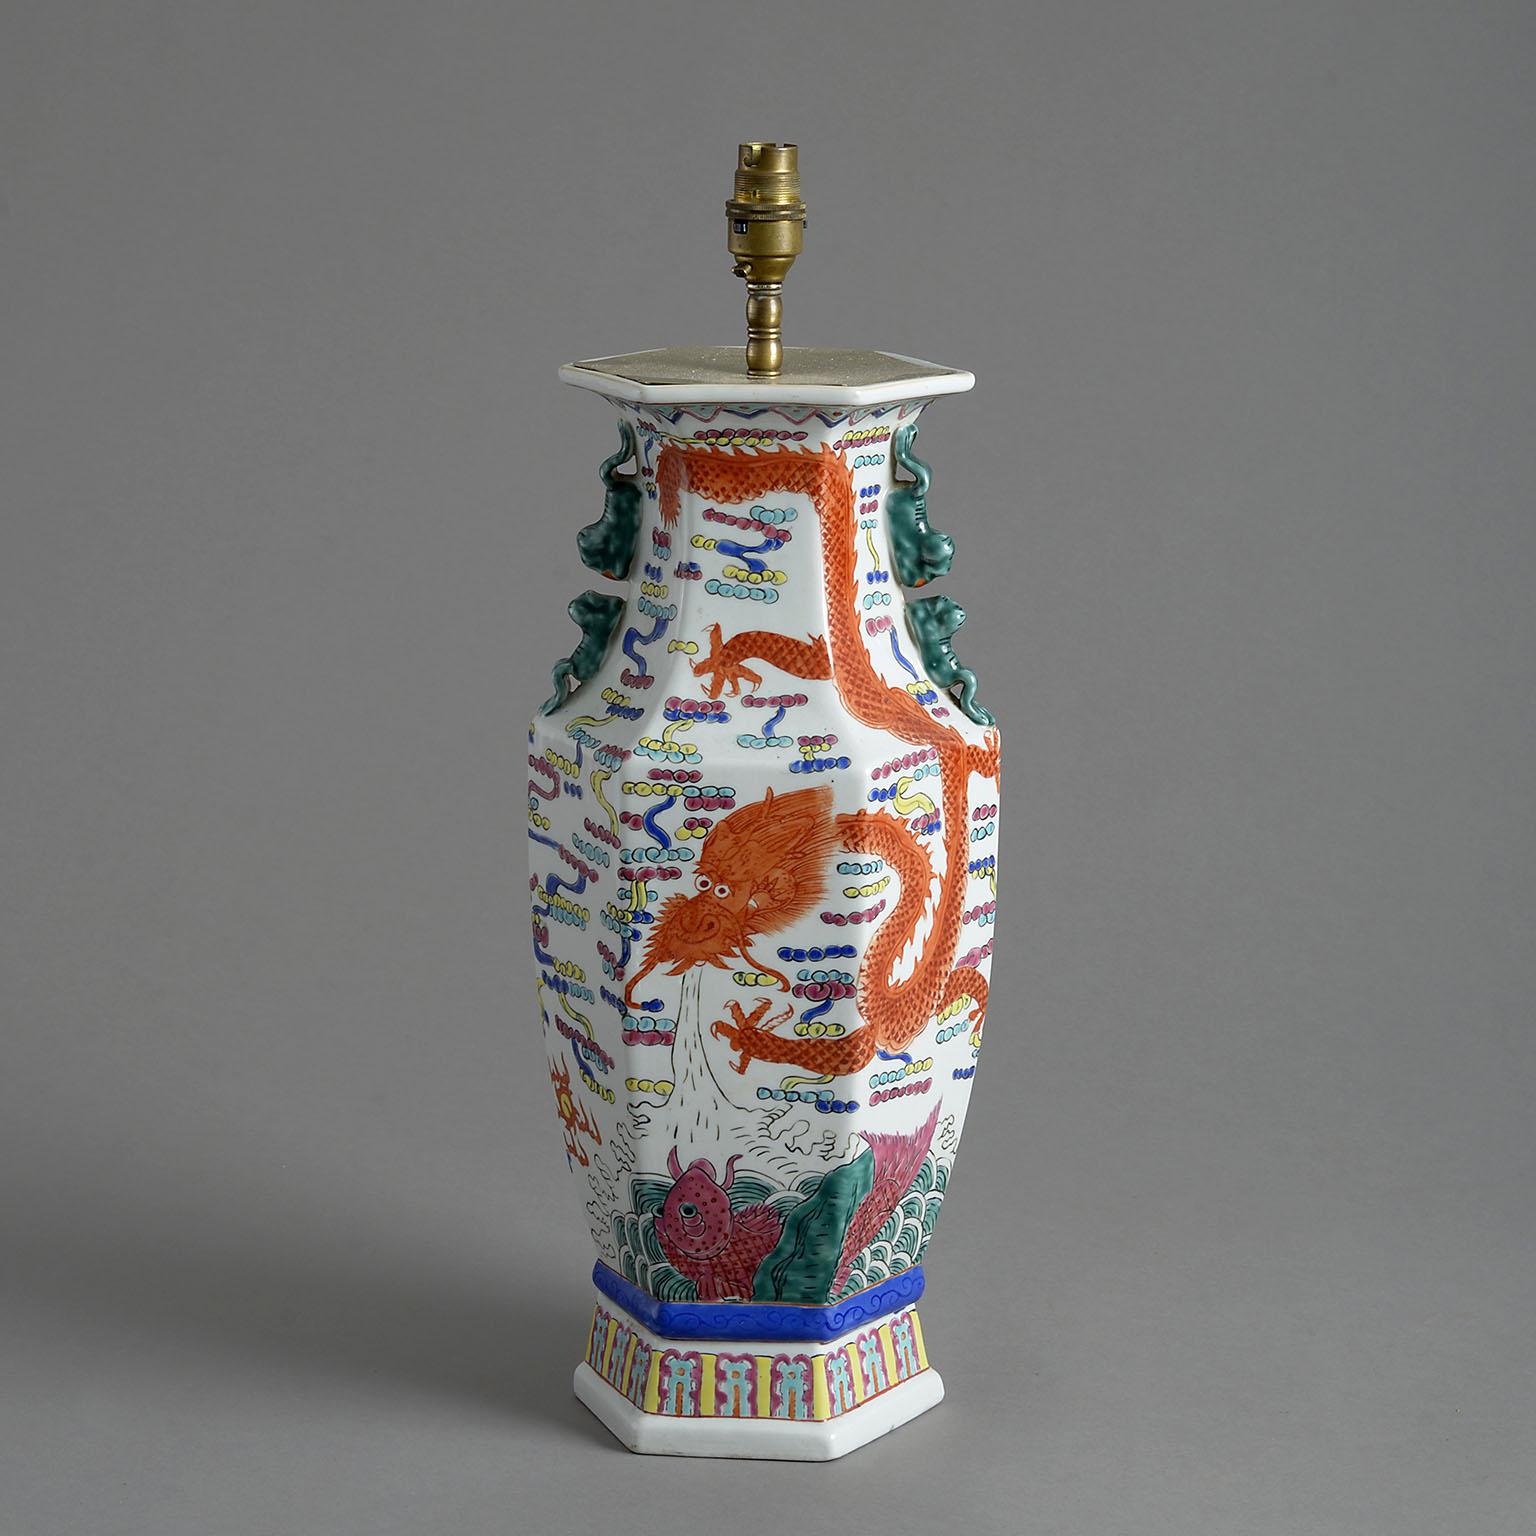 An early 20th century Chinese export porcelain vase of faceted baluster form, decorated with a dragon and carp and now mounted as a lamp base.

Dimensions refer to porcelain parts only.

Display shade not included.

This lamp can be re-wired